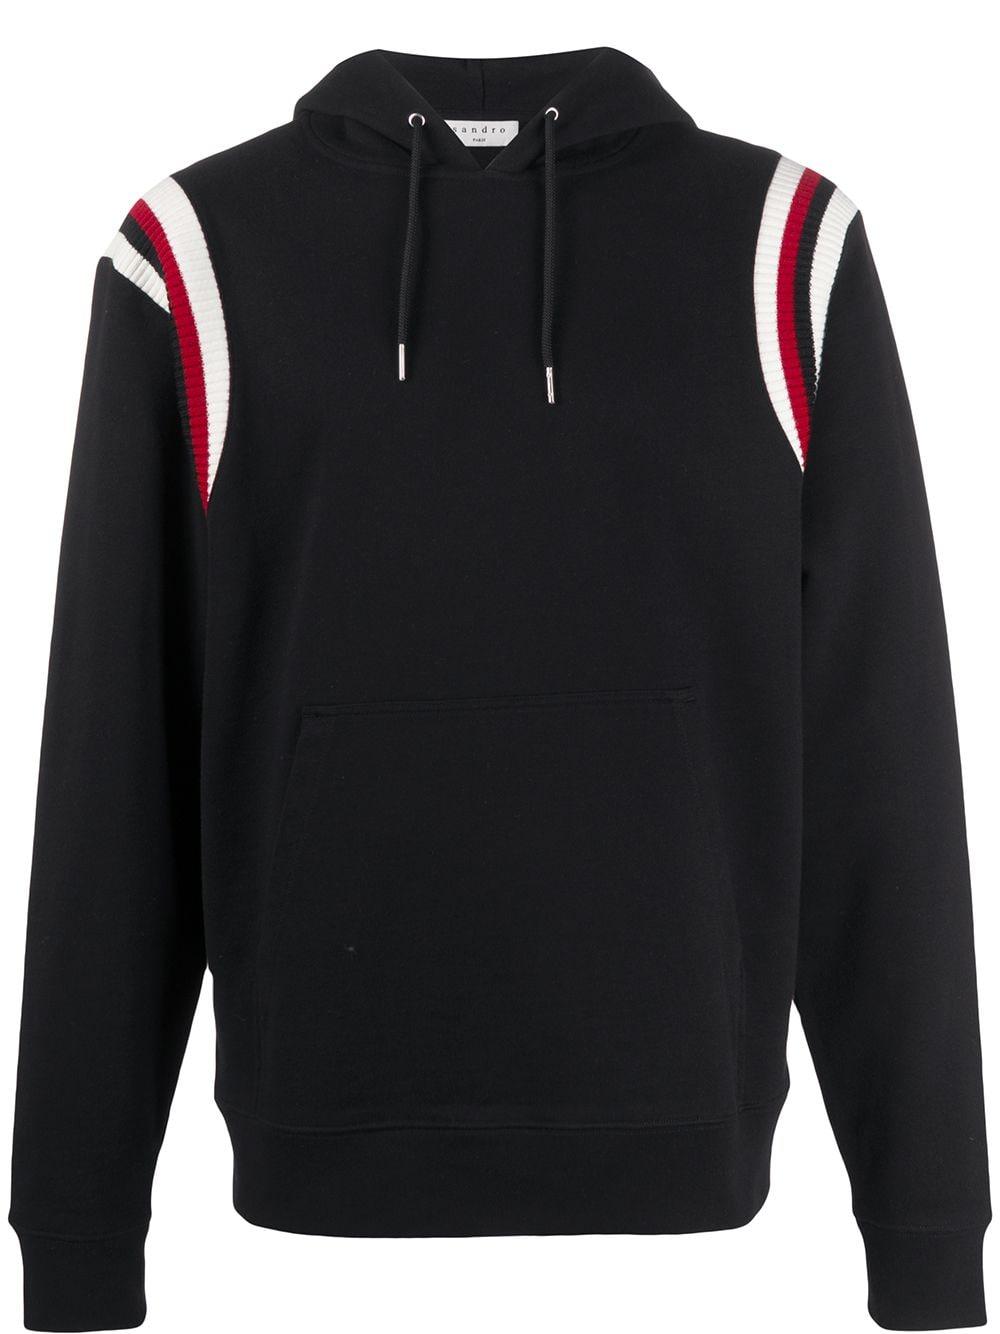 Sandro Synthetic Stripe Panel Hoodie in Black for Men - Save 23% - Lyst